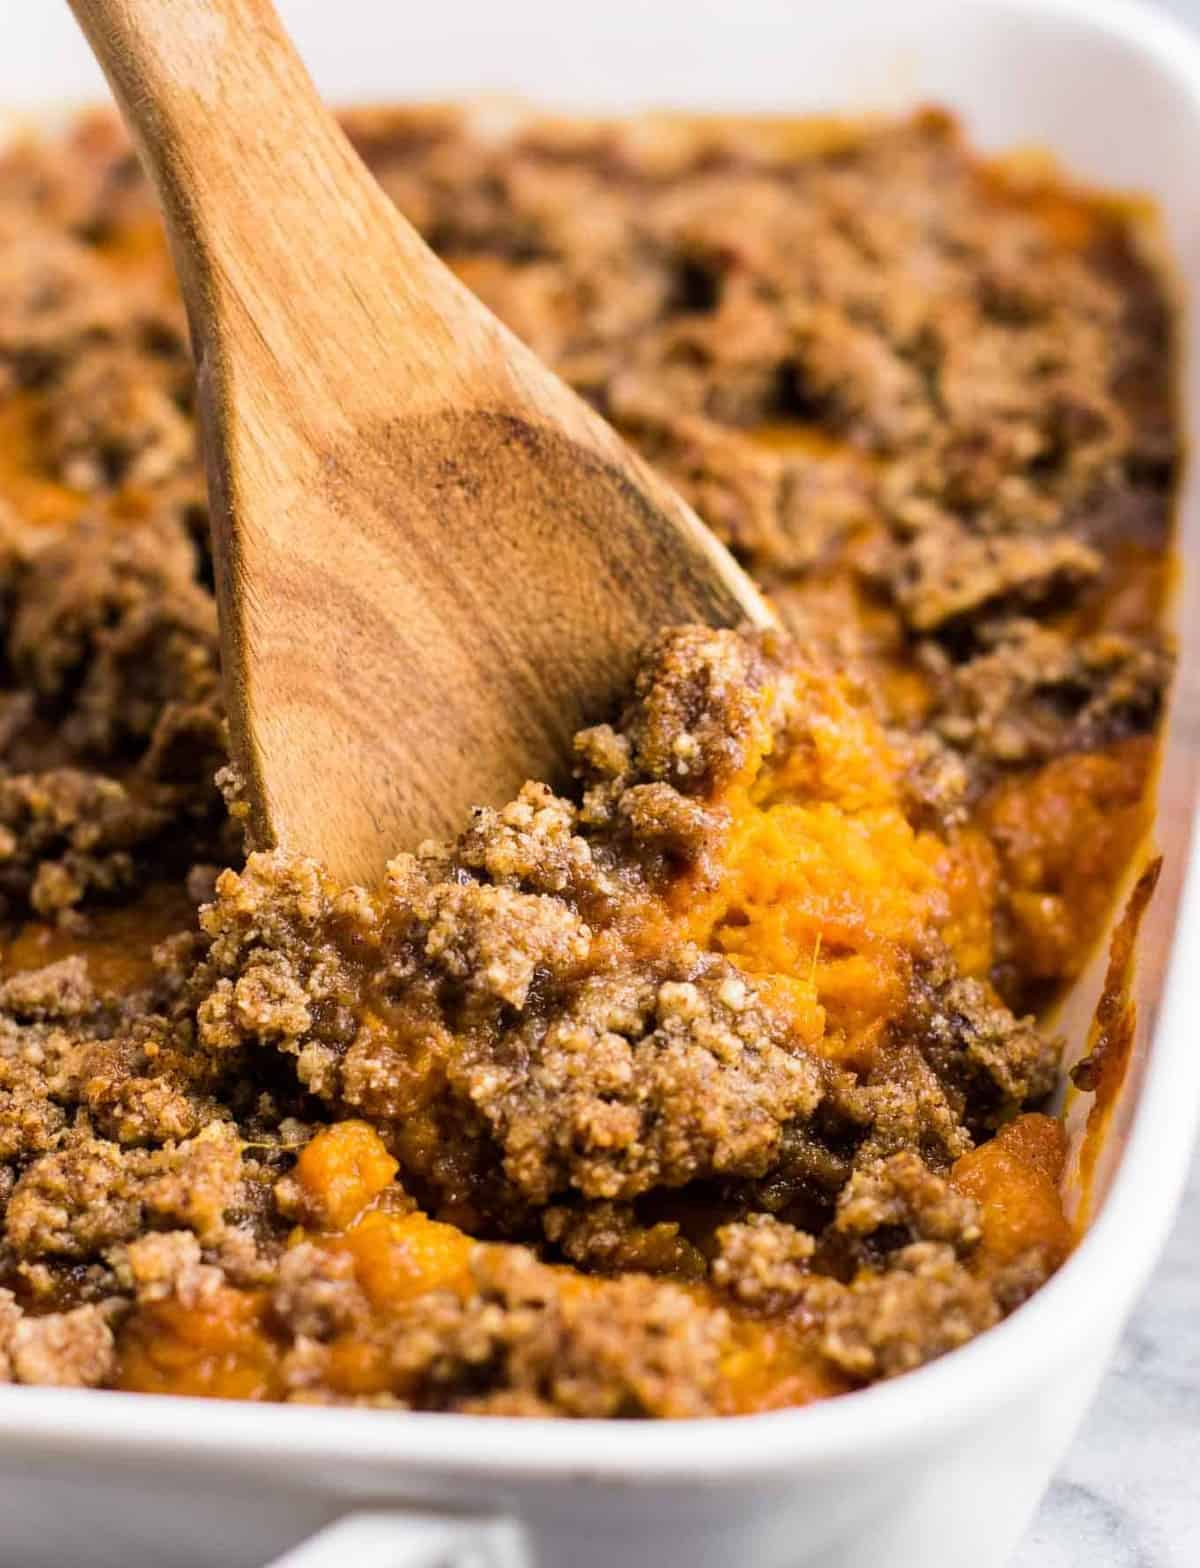 vegetarian thanksgiving menu - Gluten free sweet potato casserole with pecan crumble. This tastes incredible and everyone loves it! #sweetpotatocasserole #thanksgiving #pecans #glutenfree #vegetarian